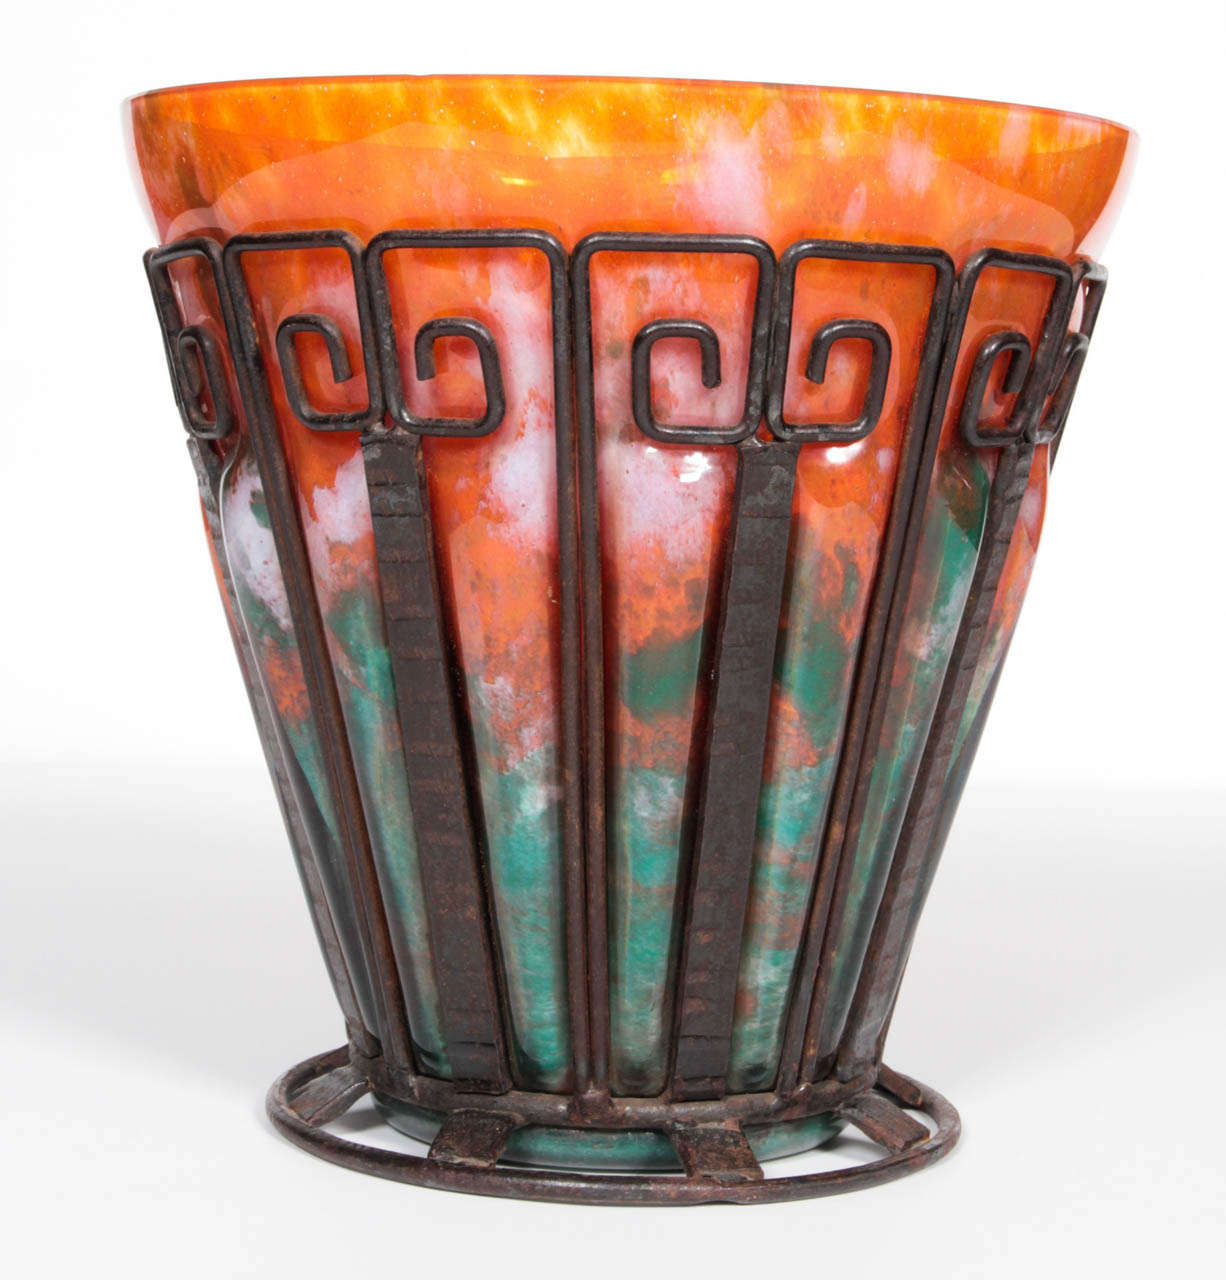 A fine Lorrain Nancy / School of Nancy original, hand-hammered wrought iron framed Art Deco glass vase with handblown mottled glass inset in
 colorful shades of orange, blue / green with specs of white. The French art glass transparent, while